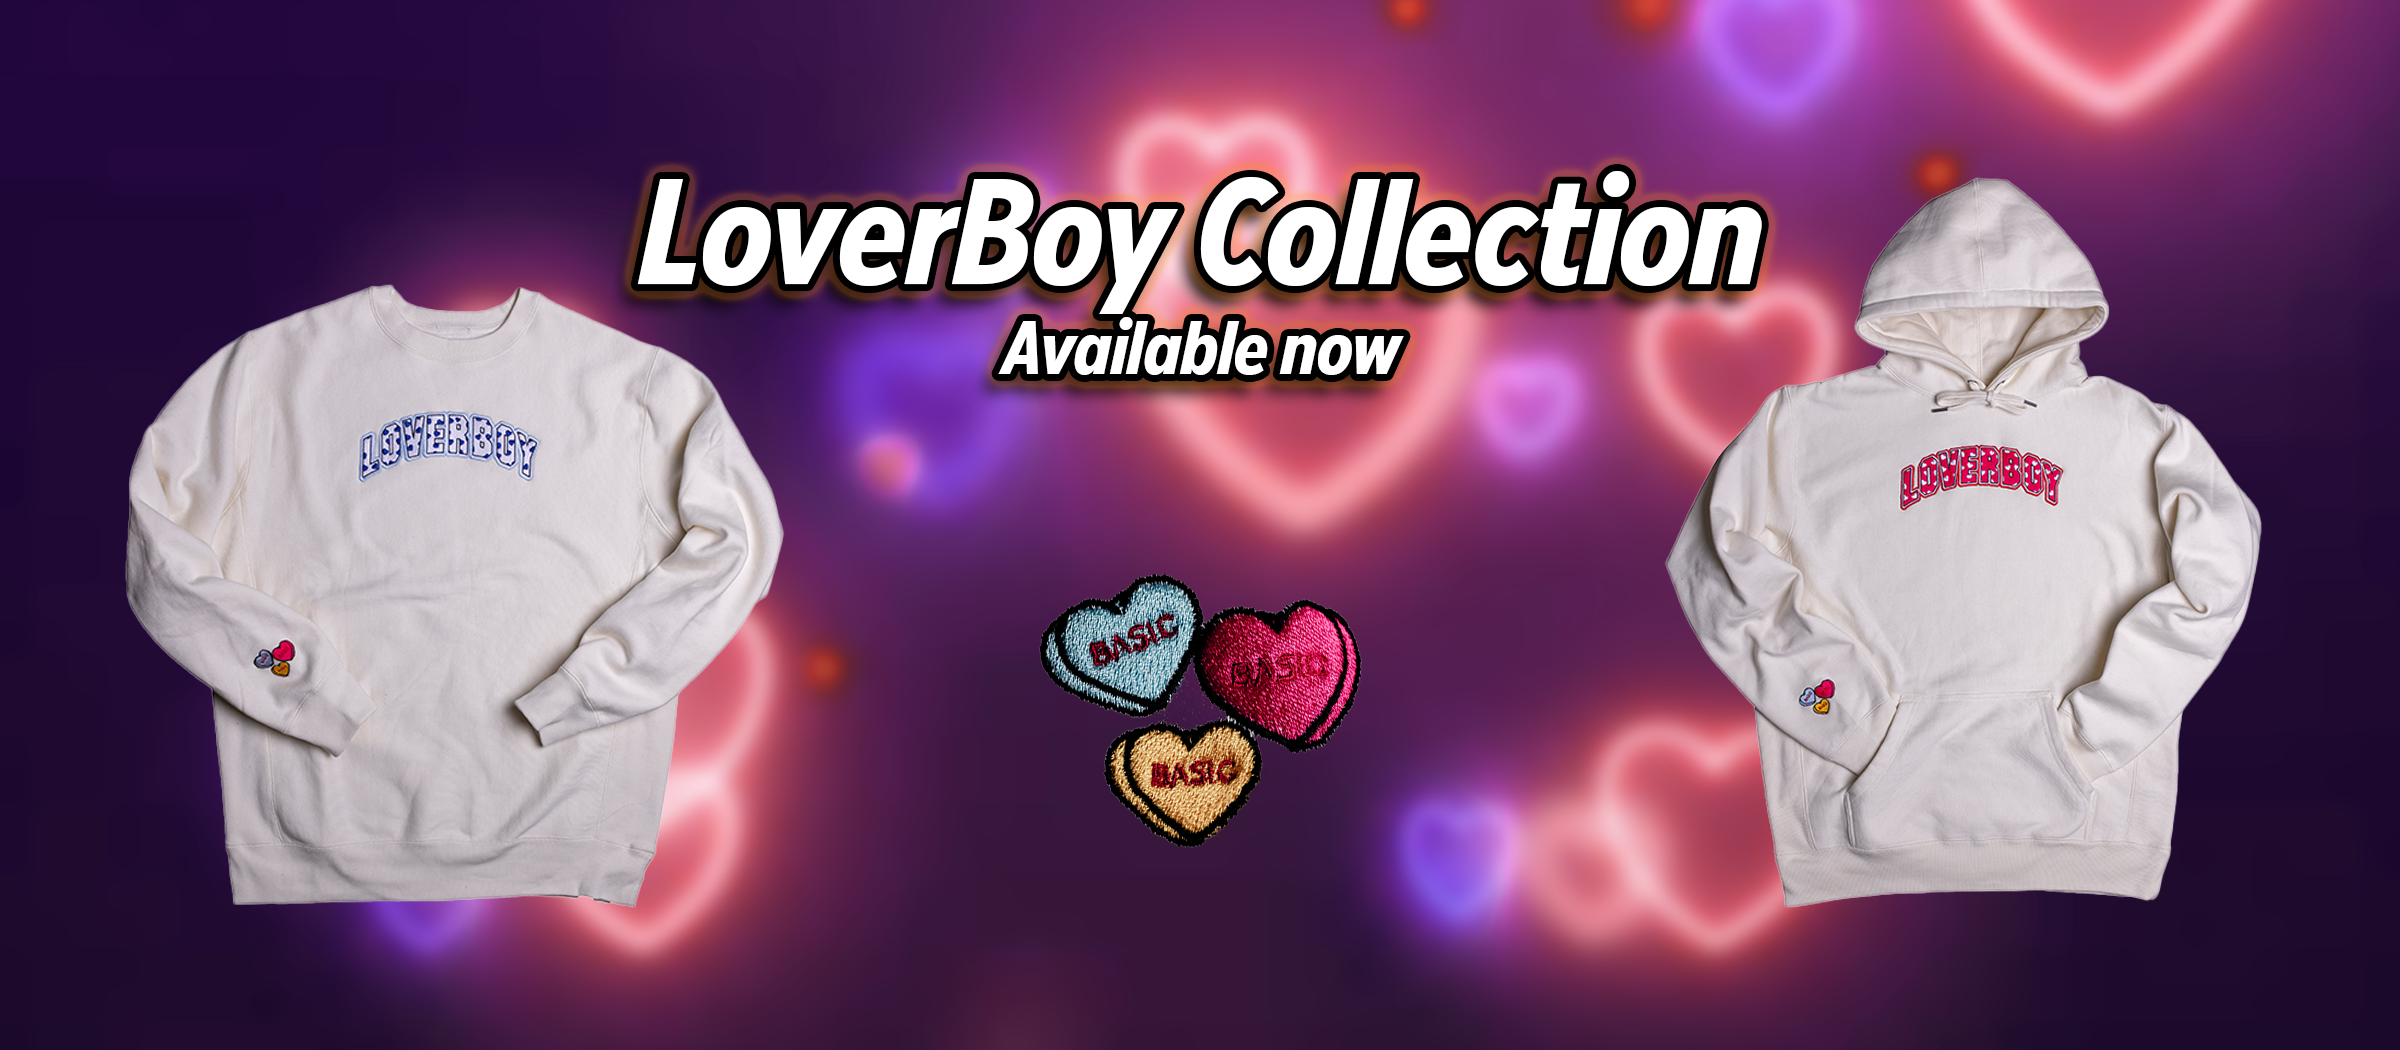 loverboy banner new.png